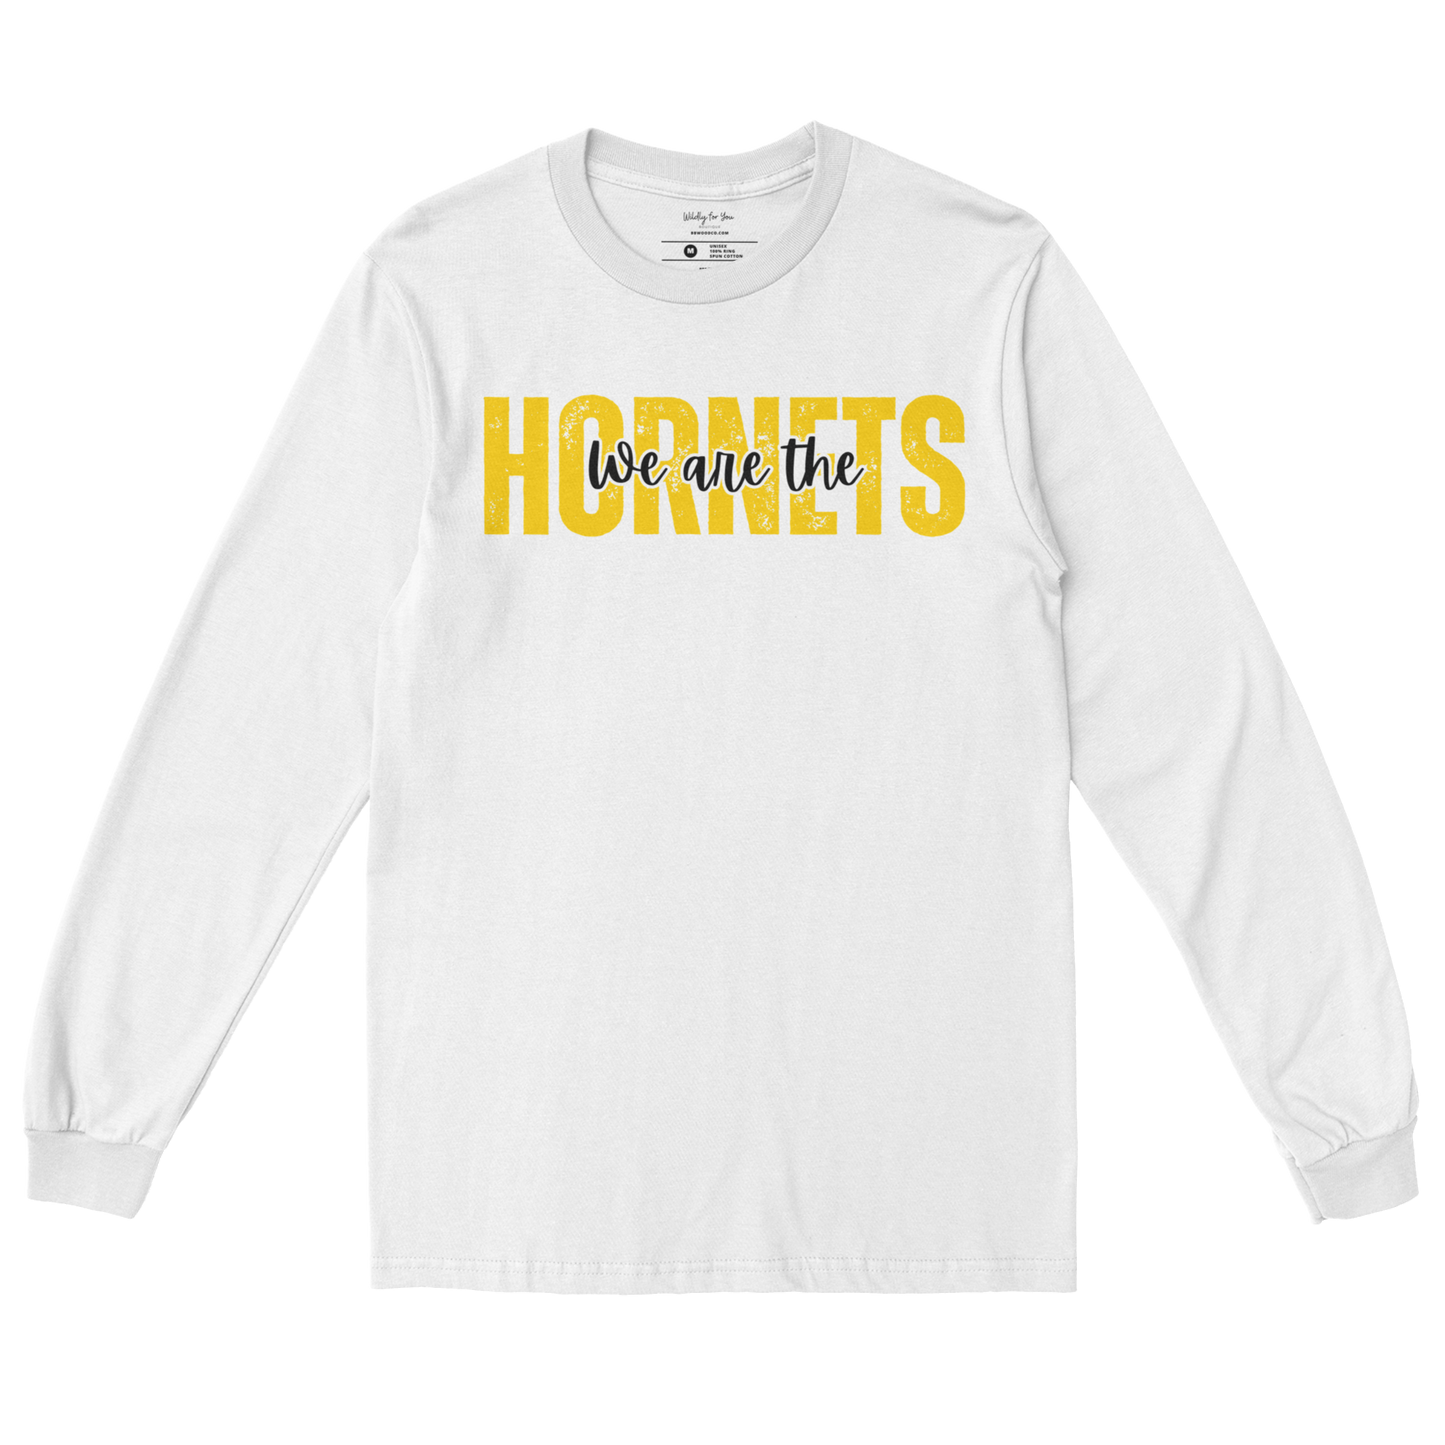 We are the Hornets Youth Long Sleeve Tee